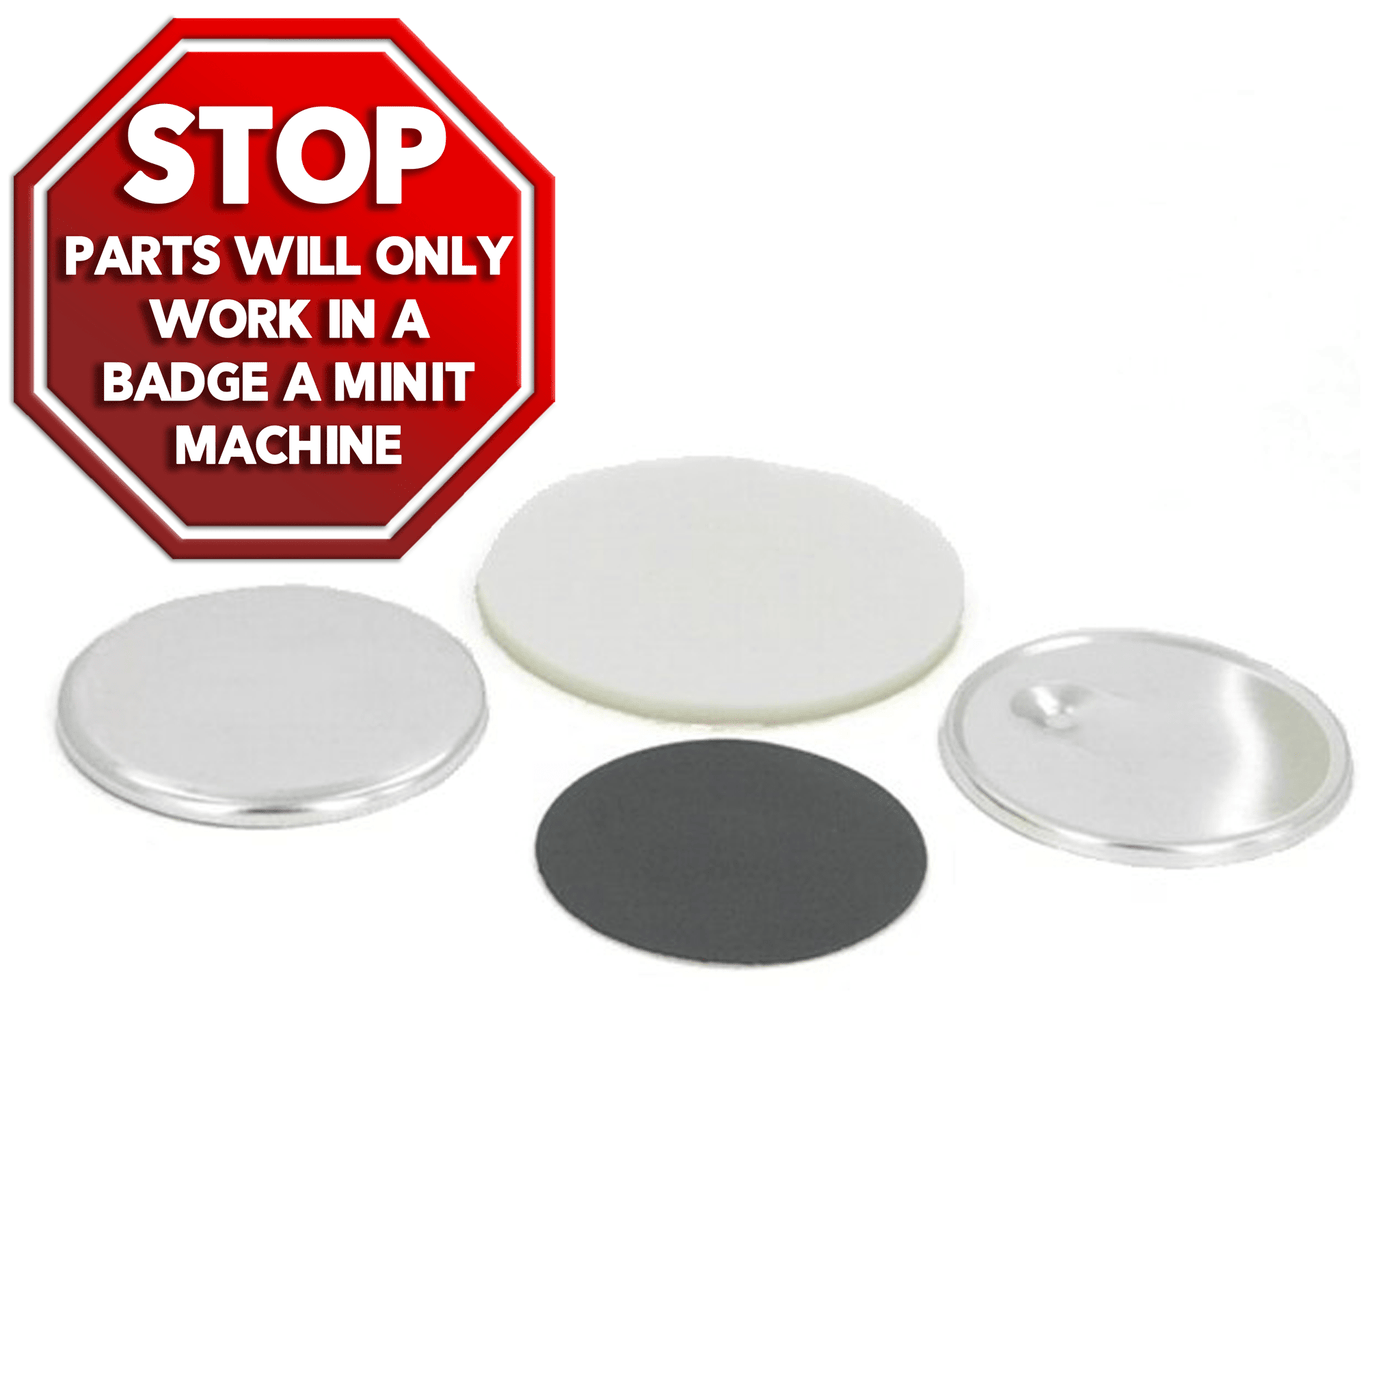 Magnet back sets for BADGE-A-MINIT 2-1/4" button machine, round magnets